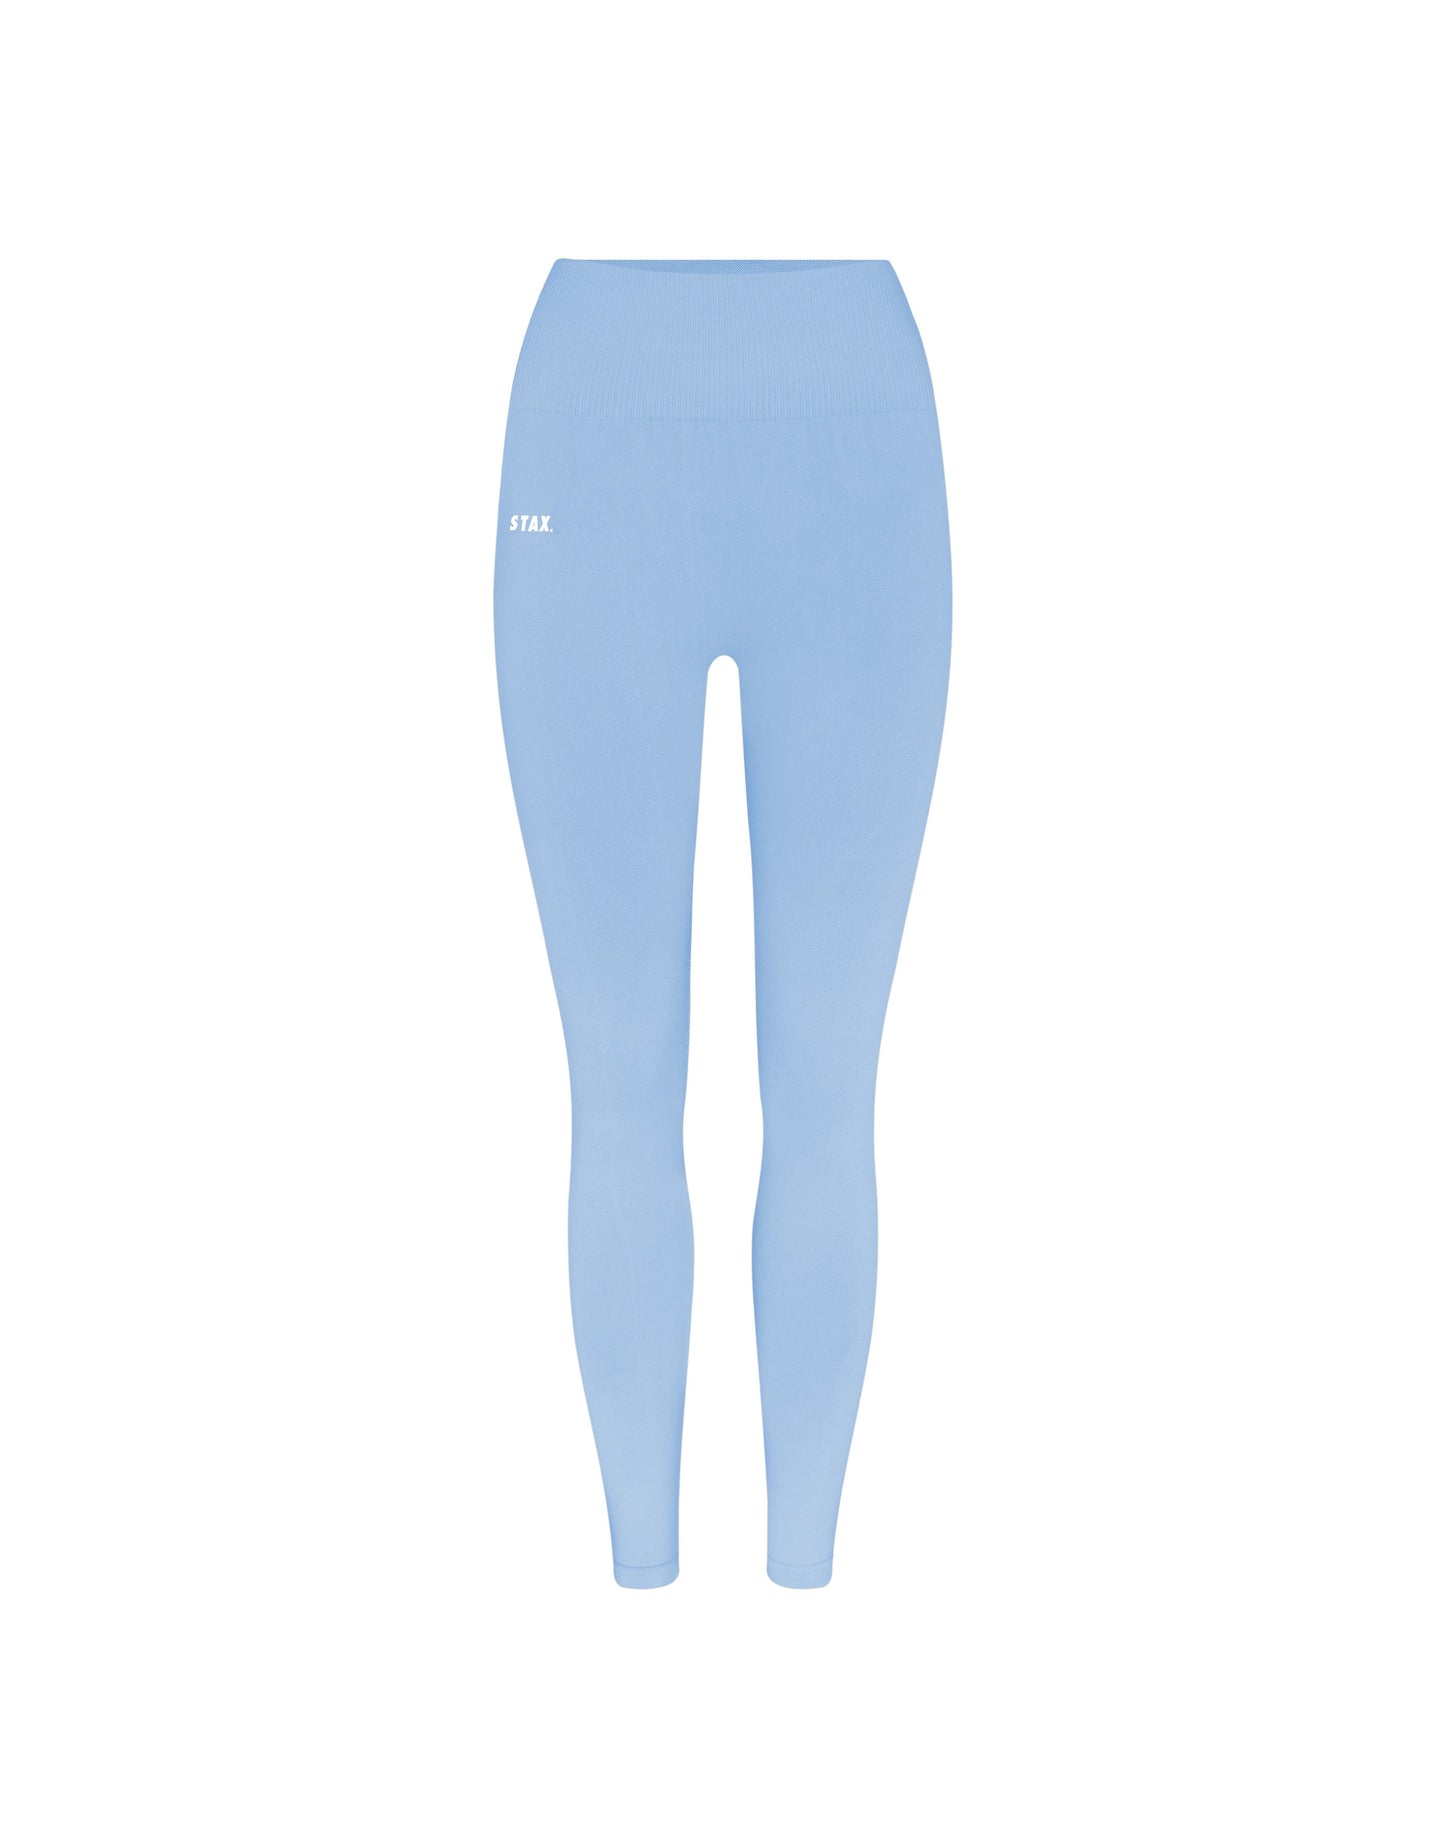 STAX. Premium Seamless V5.1 (Favourites) Full Length Tights - Baby Blue